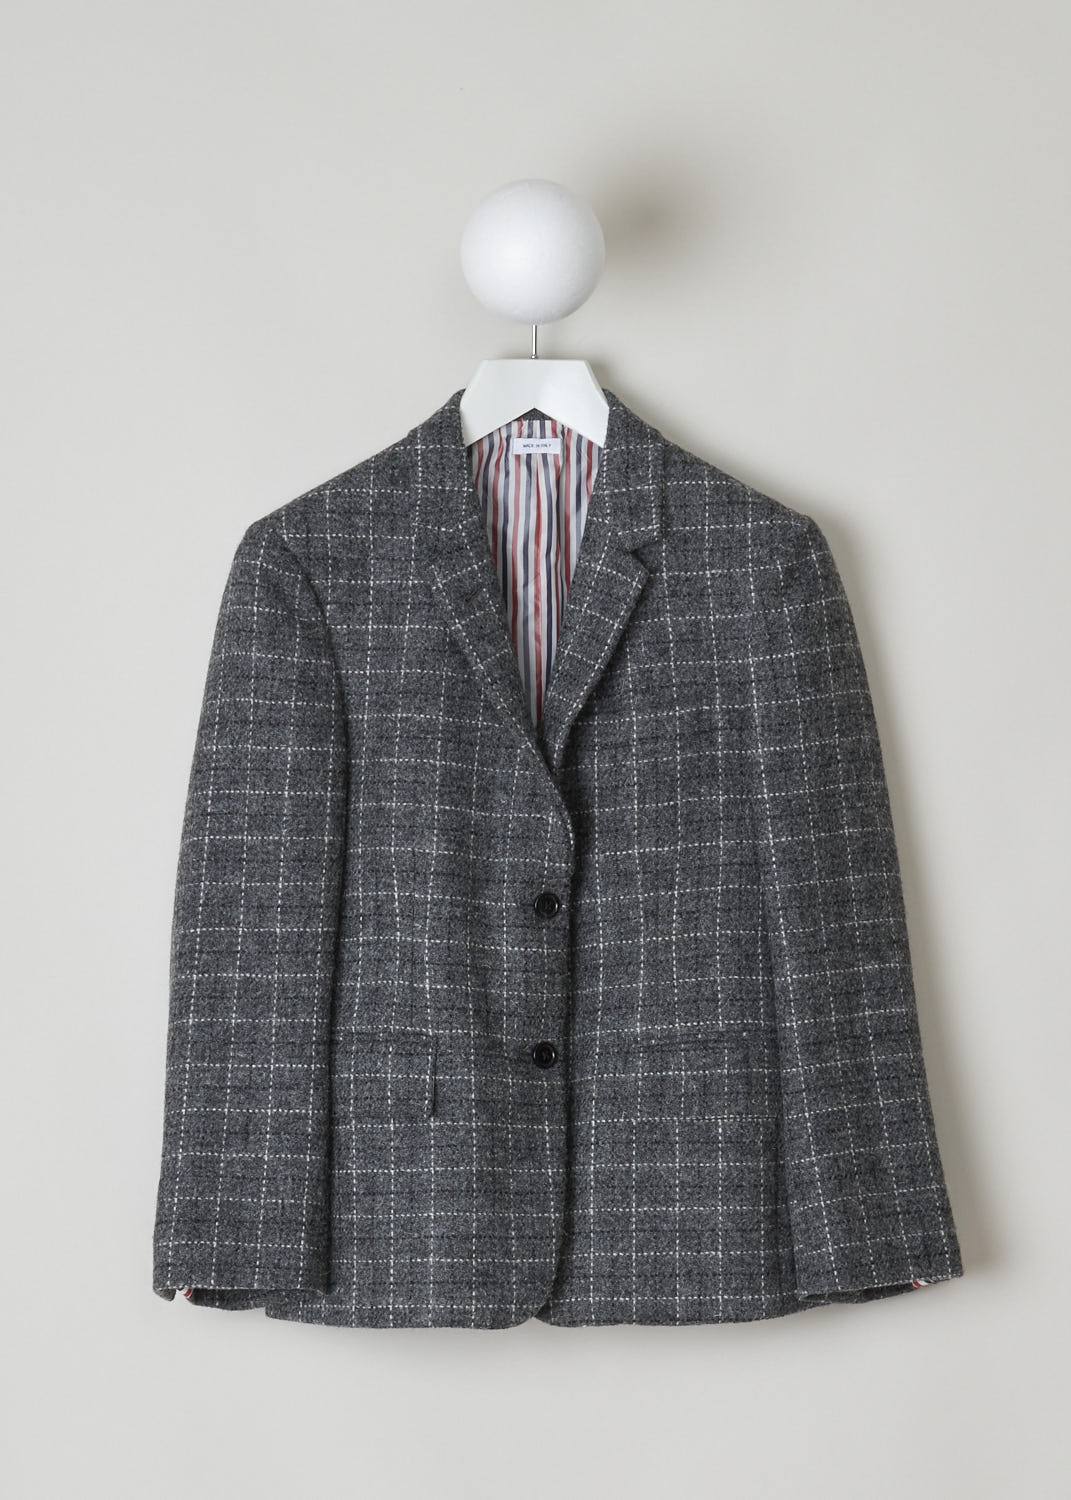 THOM BROWNE, GREY TWEED BLAZER WITH CHECKED PATTERN, FBC637A_06878_025_DARK_GREY, Grey, Front, Grey tweed blazer with a checked pattern. This blazer features a notch lapel, a single chest pocket and two flap pockets and long cuffed sleeves with four buttons. Two buttons on the front are your fastening option on this blazer. This the back, the grosgrain tab can be found.
